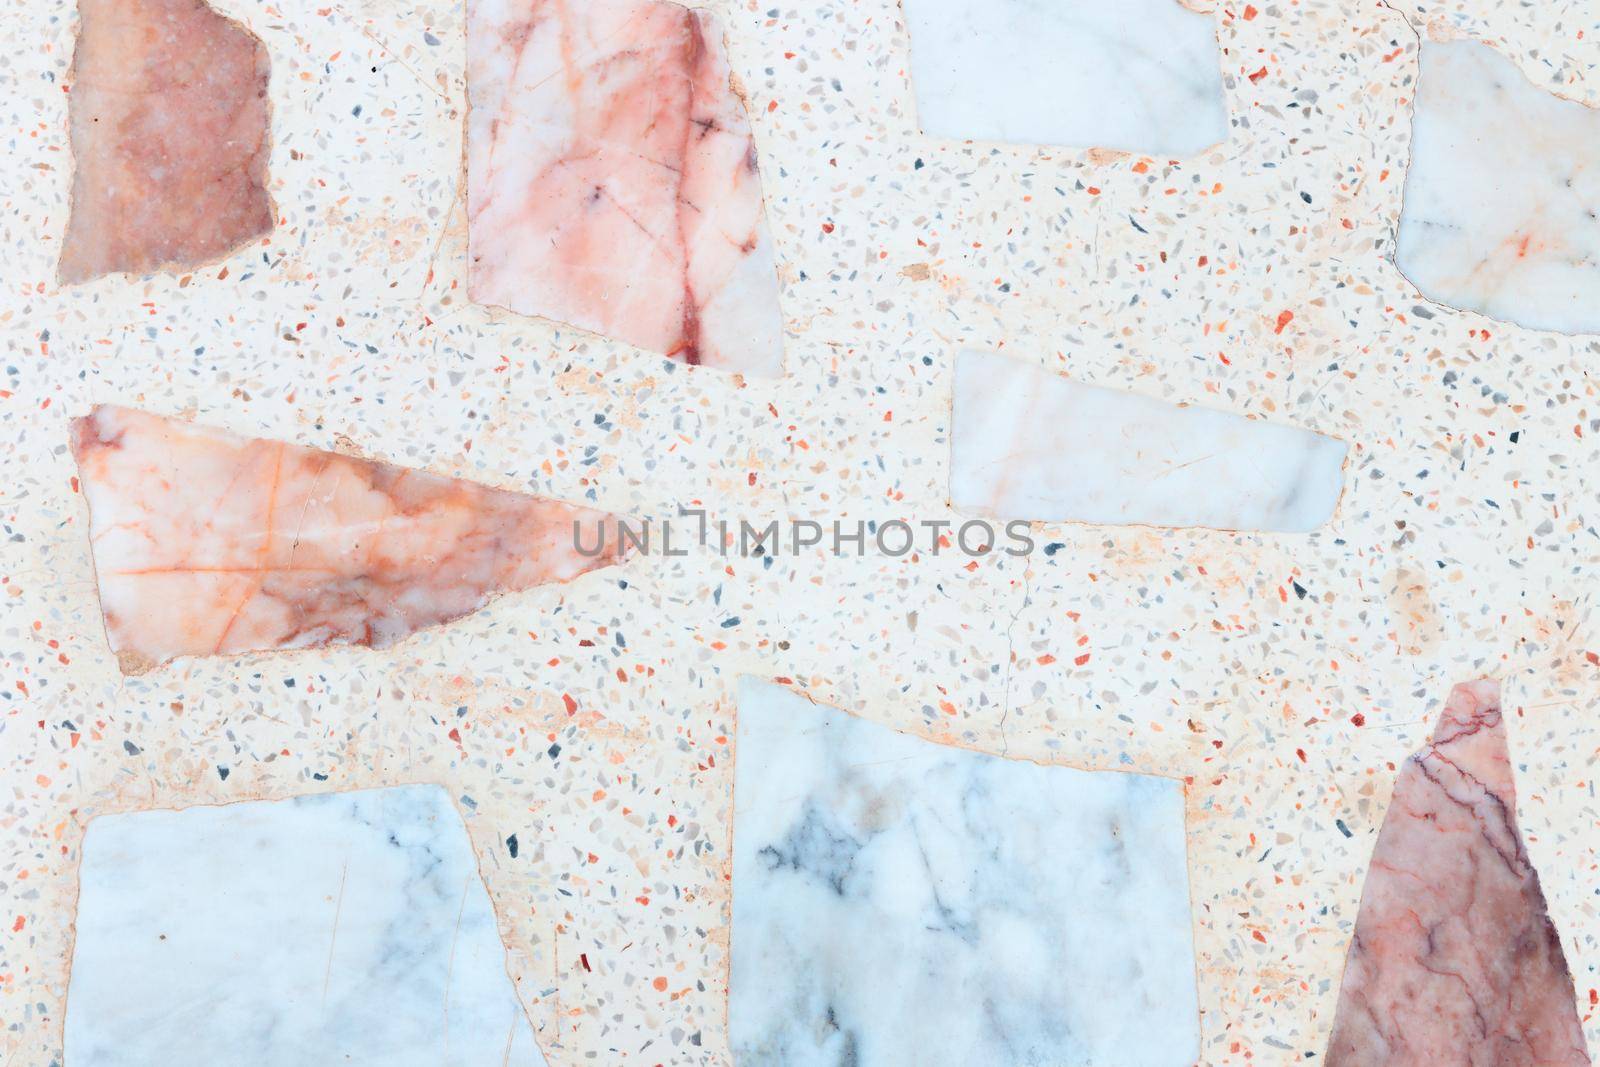 terrazzo flooring or polished stone pattern wall and color surface marble vintage texture old for background image horizontal